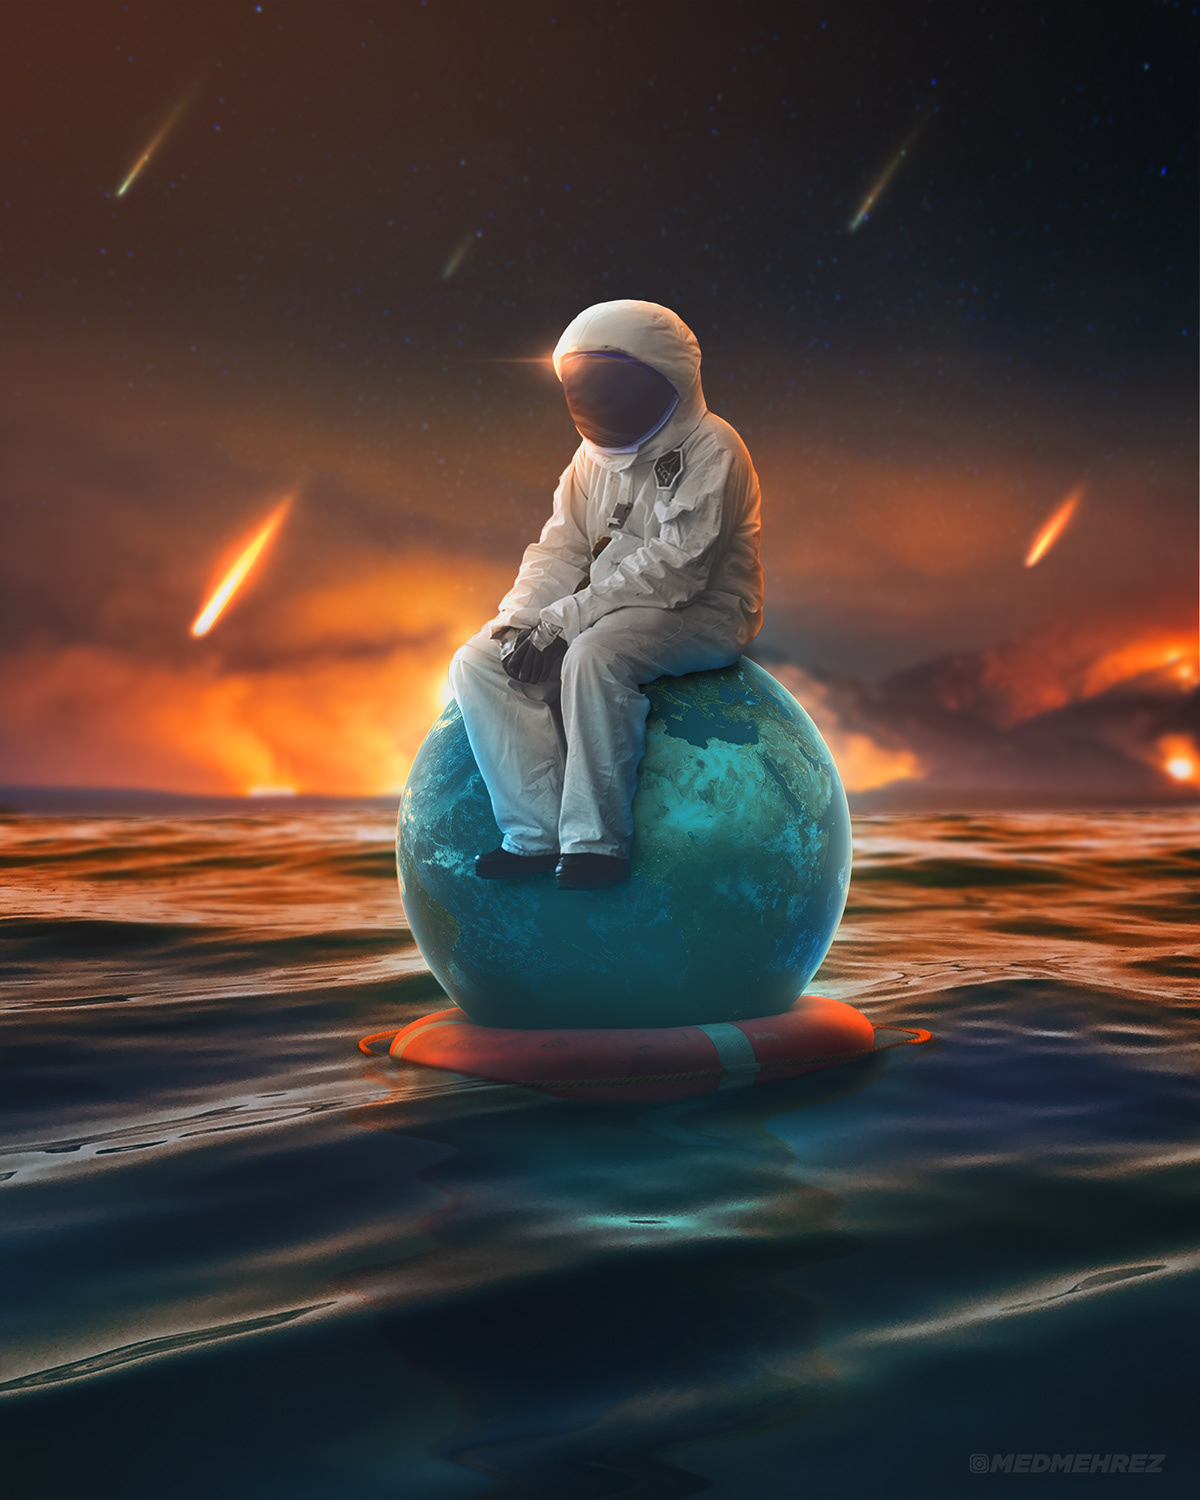 Astronaut sitting on planet earth floating in the ocean in the middle of nowhere, meteors falling 